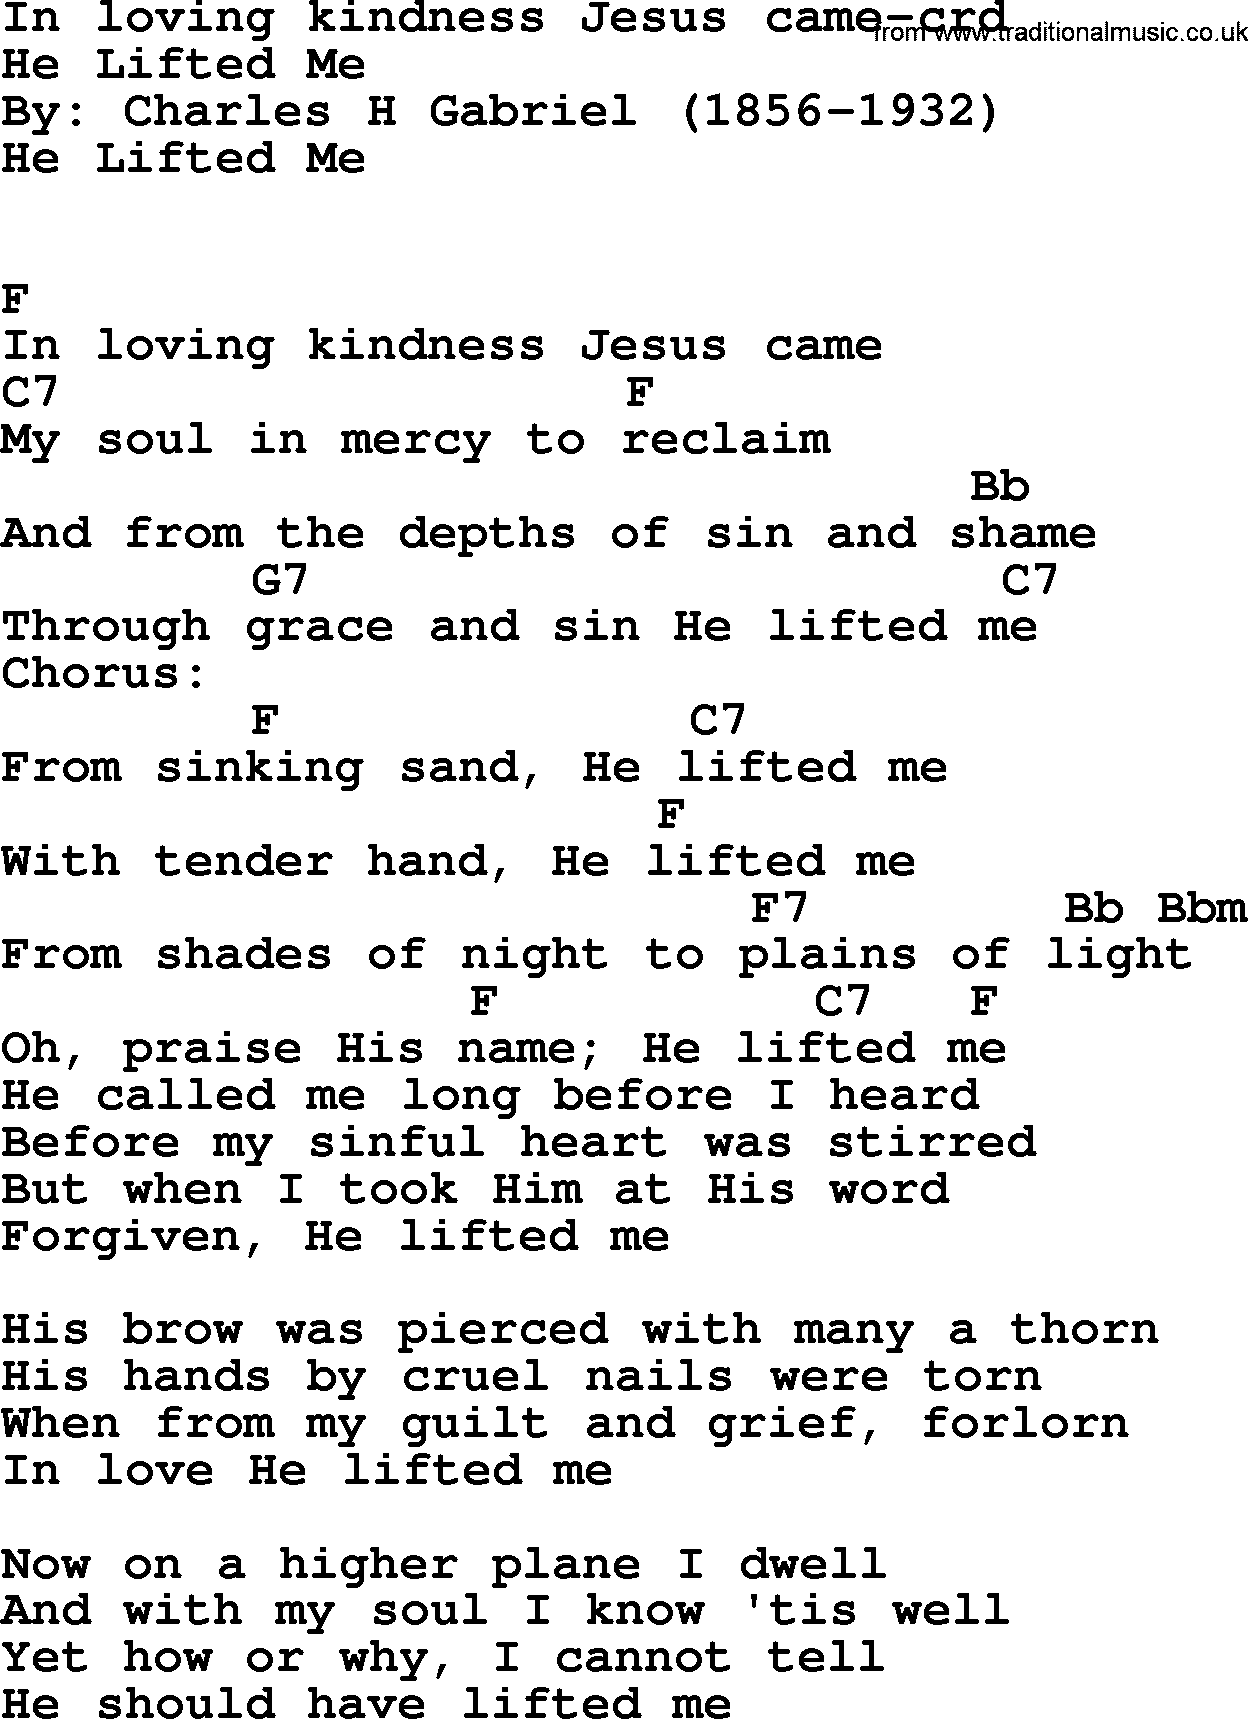 Forgiveness hymns, Hymn: In Loving Kindness Jesus Came, lyrics chords and PDF